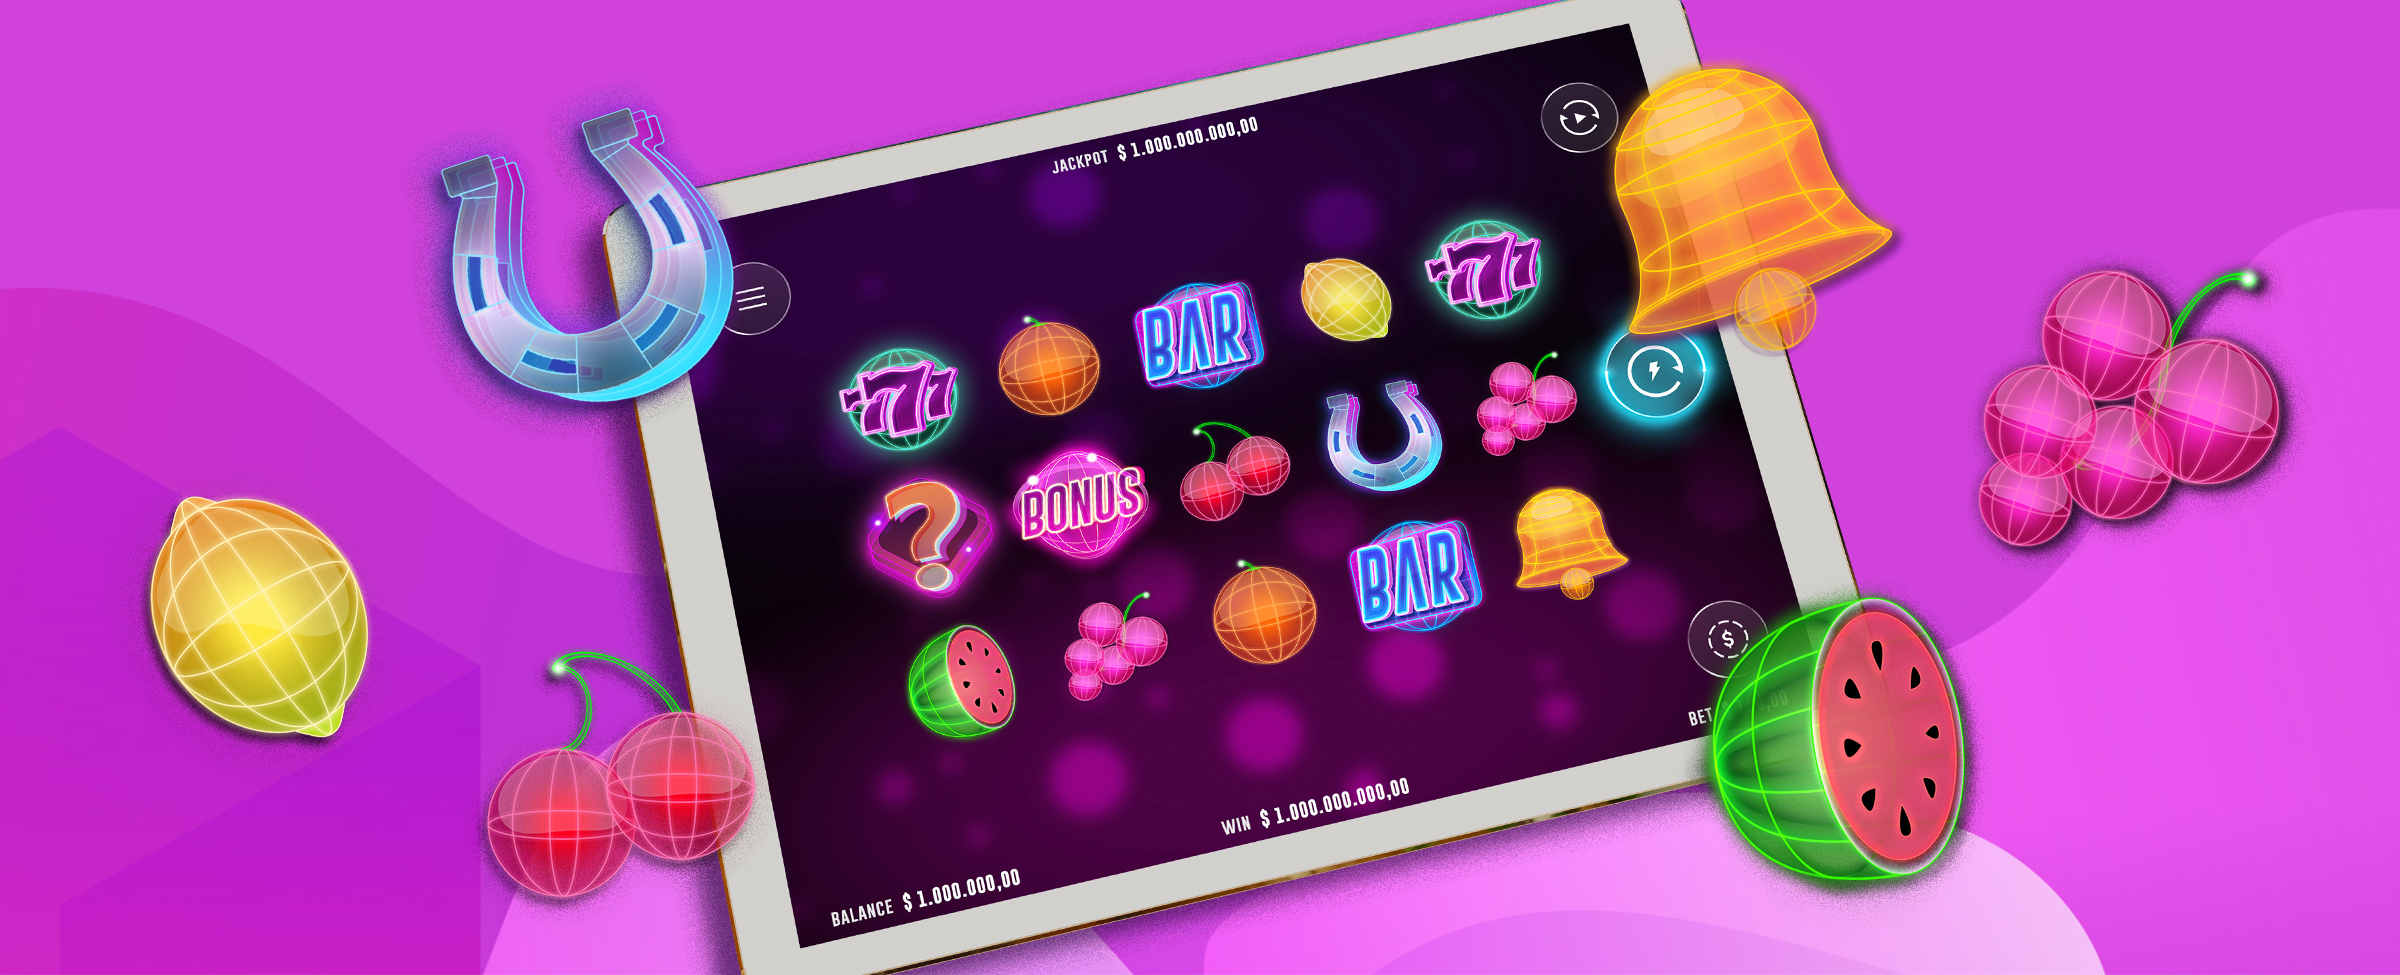 Where would we be without 777 Deluxe in our line-up? This slot is an instant classic, and one of our most popular games. Try it now to see why.